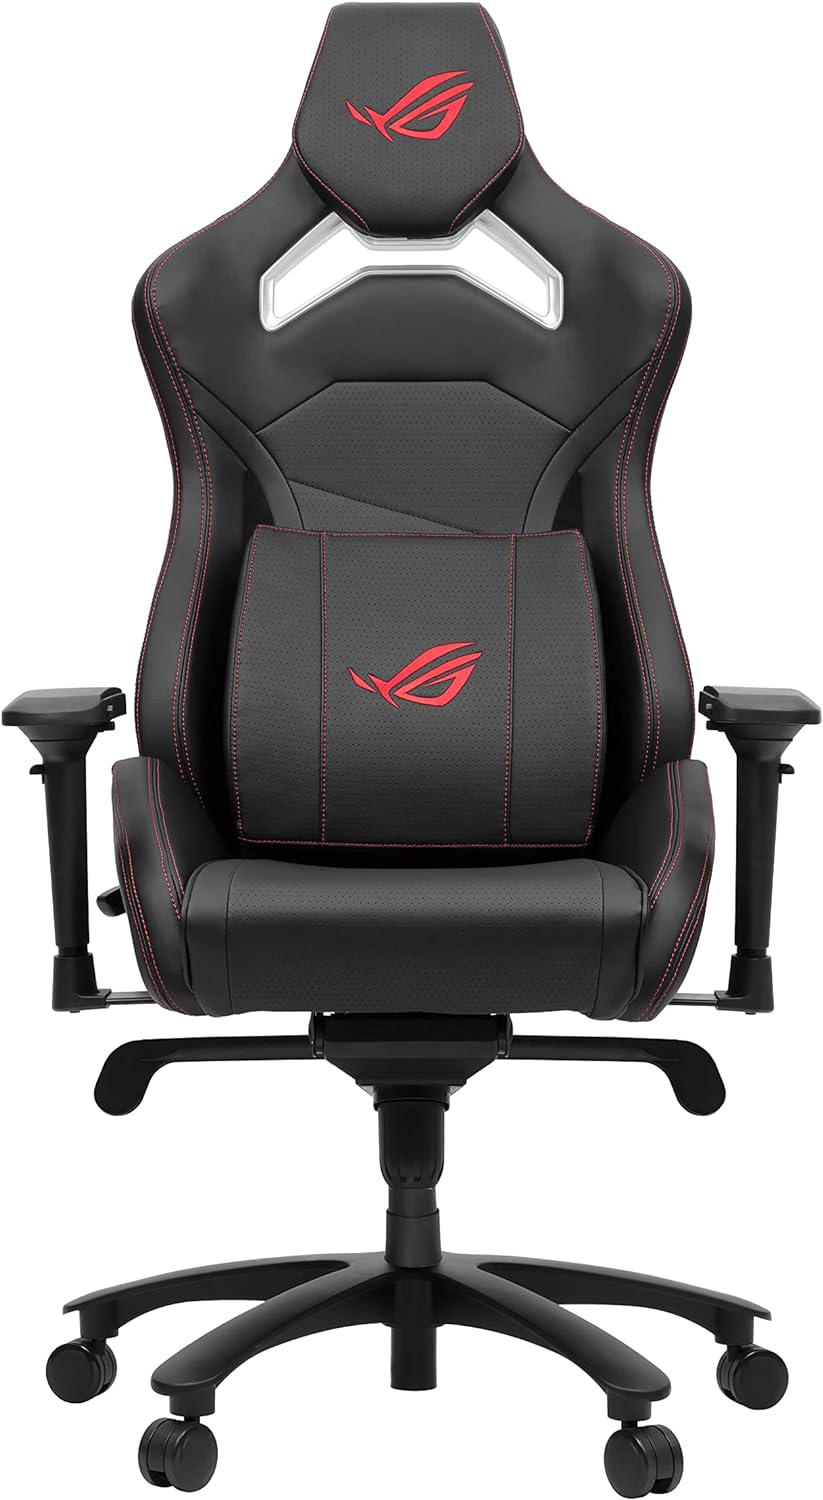 ASUS ROG Chariot Core Gaming Chair features 4D adjustable armrests for personalized comfort. 4718017322782